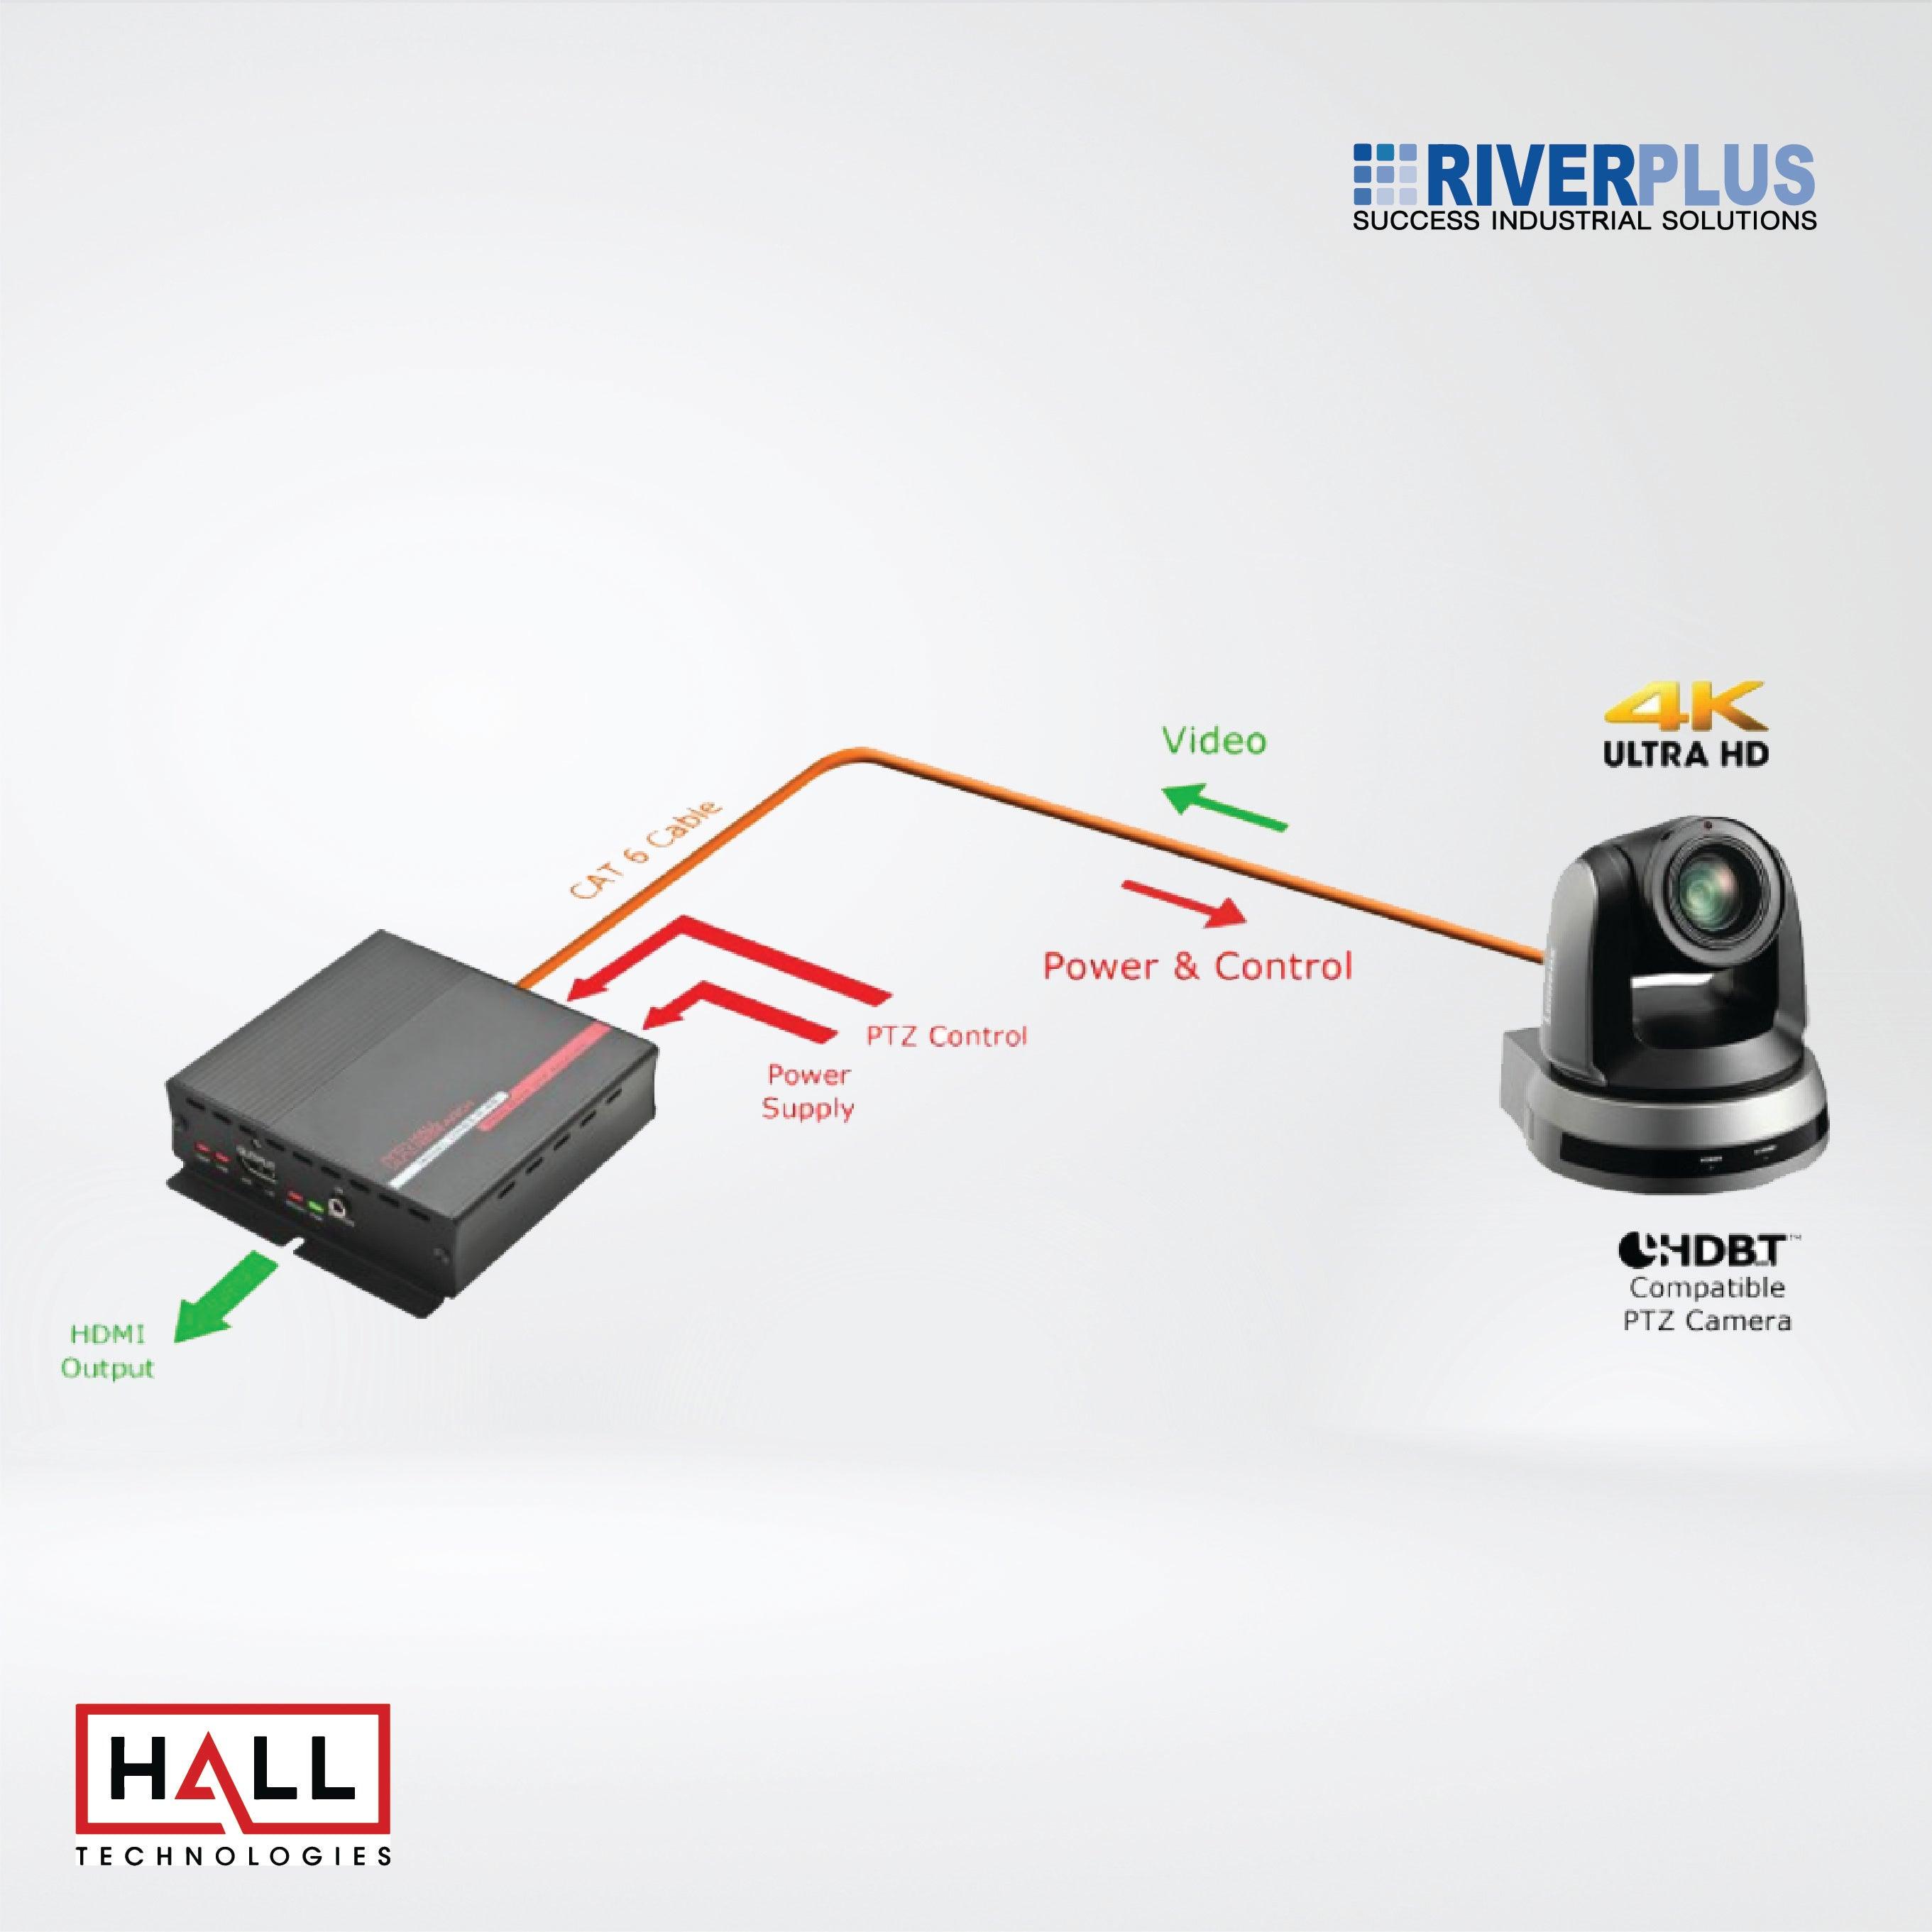 UHBX-R-48 HDBaseT Receiver with HDMI output, Bidirectional IR, RS232, and PoH Source (Power over HDBaseT) - Riverplus